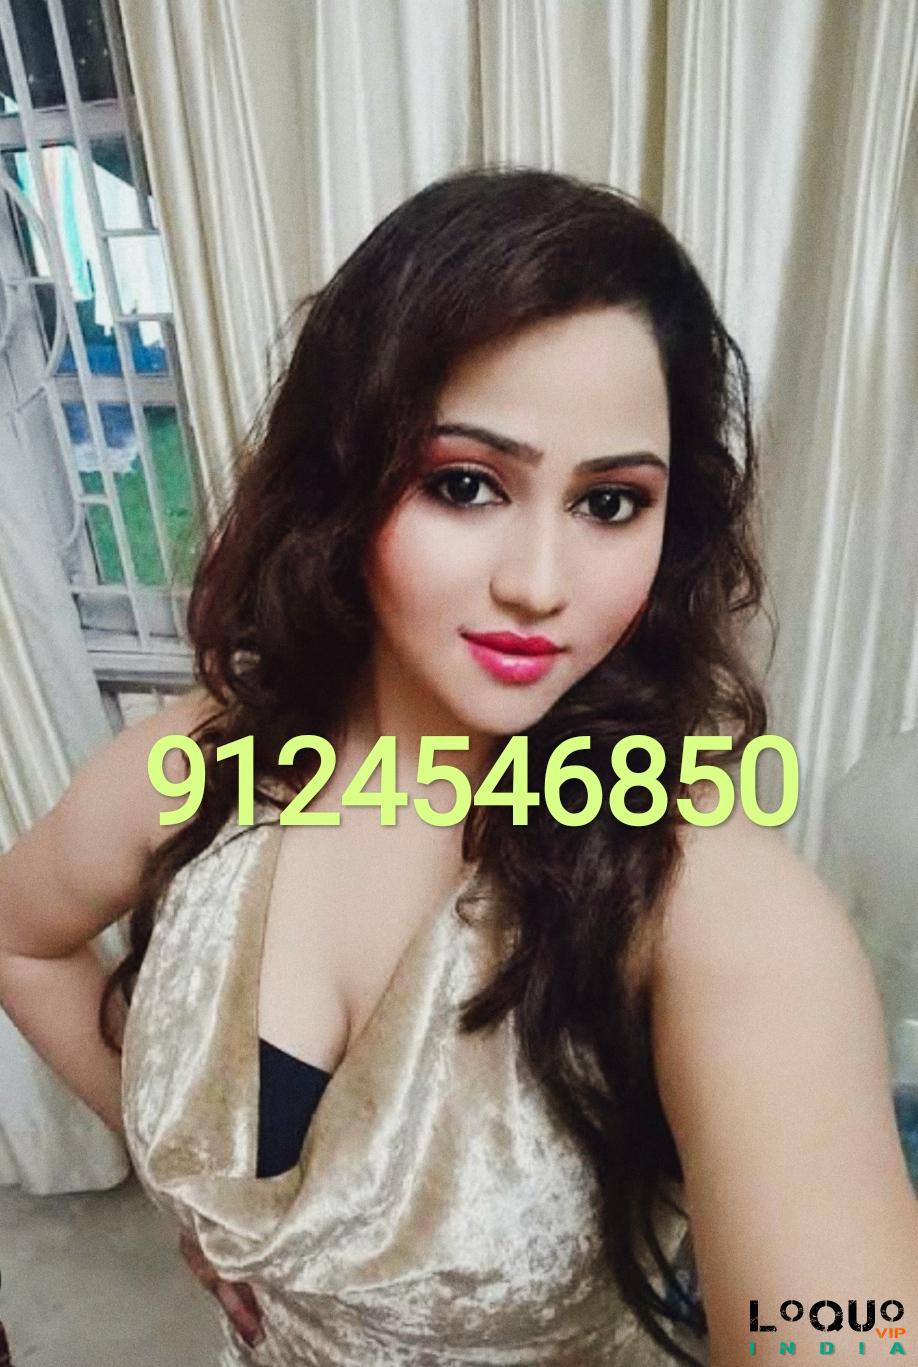 Call Girls Andhra Pradesh: Hotest__CALL GIRL LIVE VIDEO CALLING  9124546850 FIND NOW